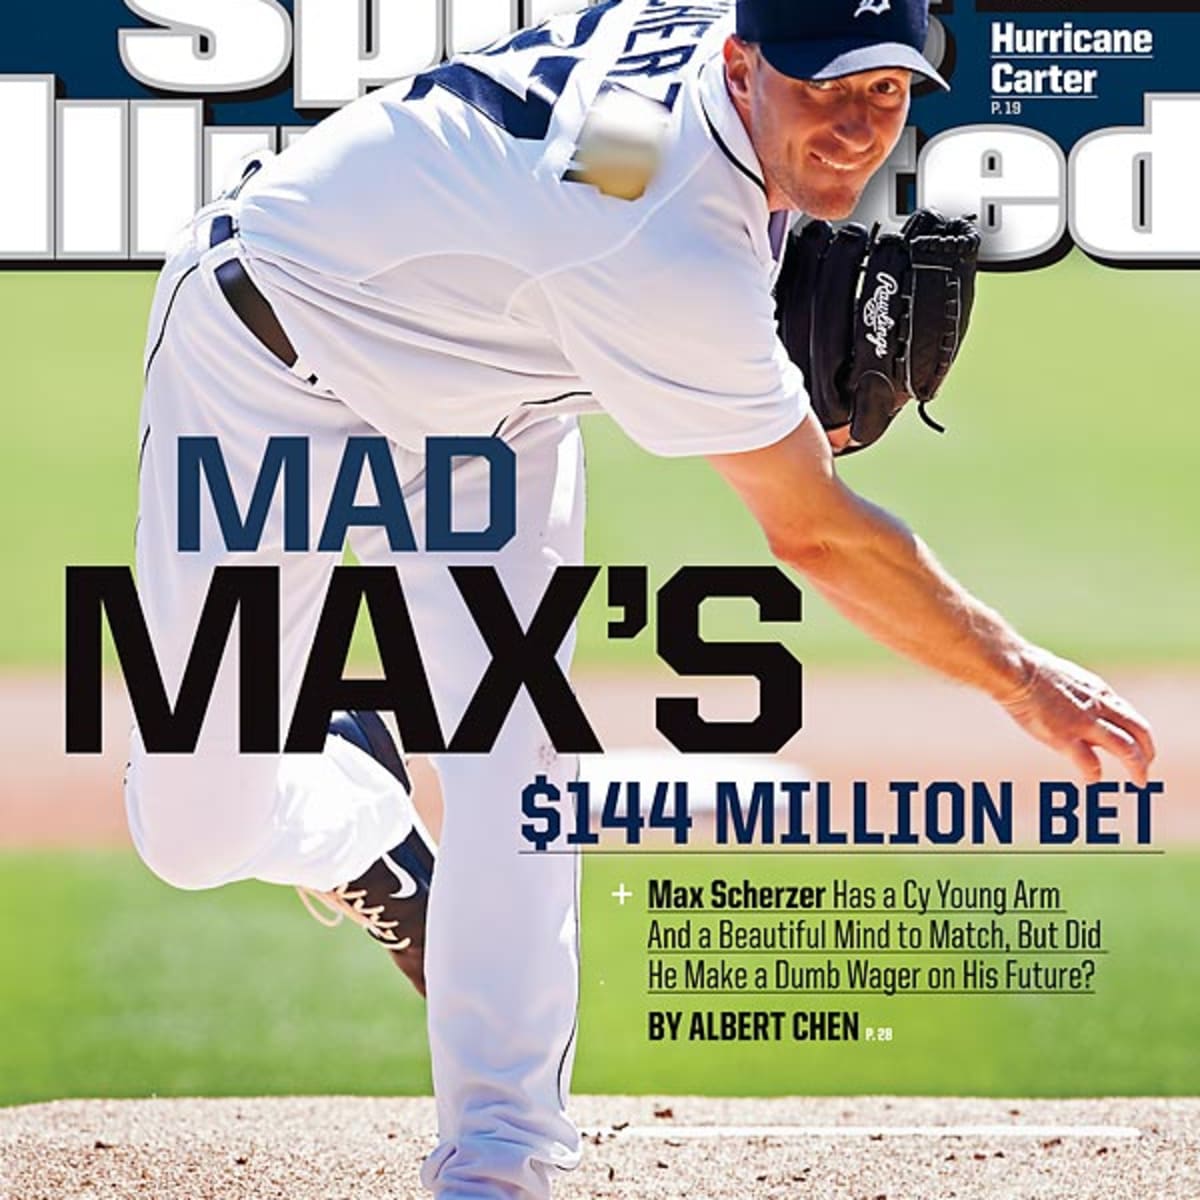 Max Scherzer deals complete game, wife goes into labor - Sports Illustrated